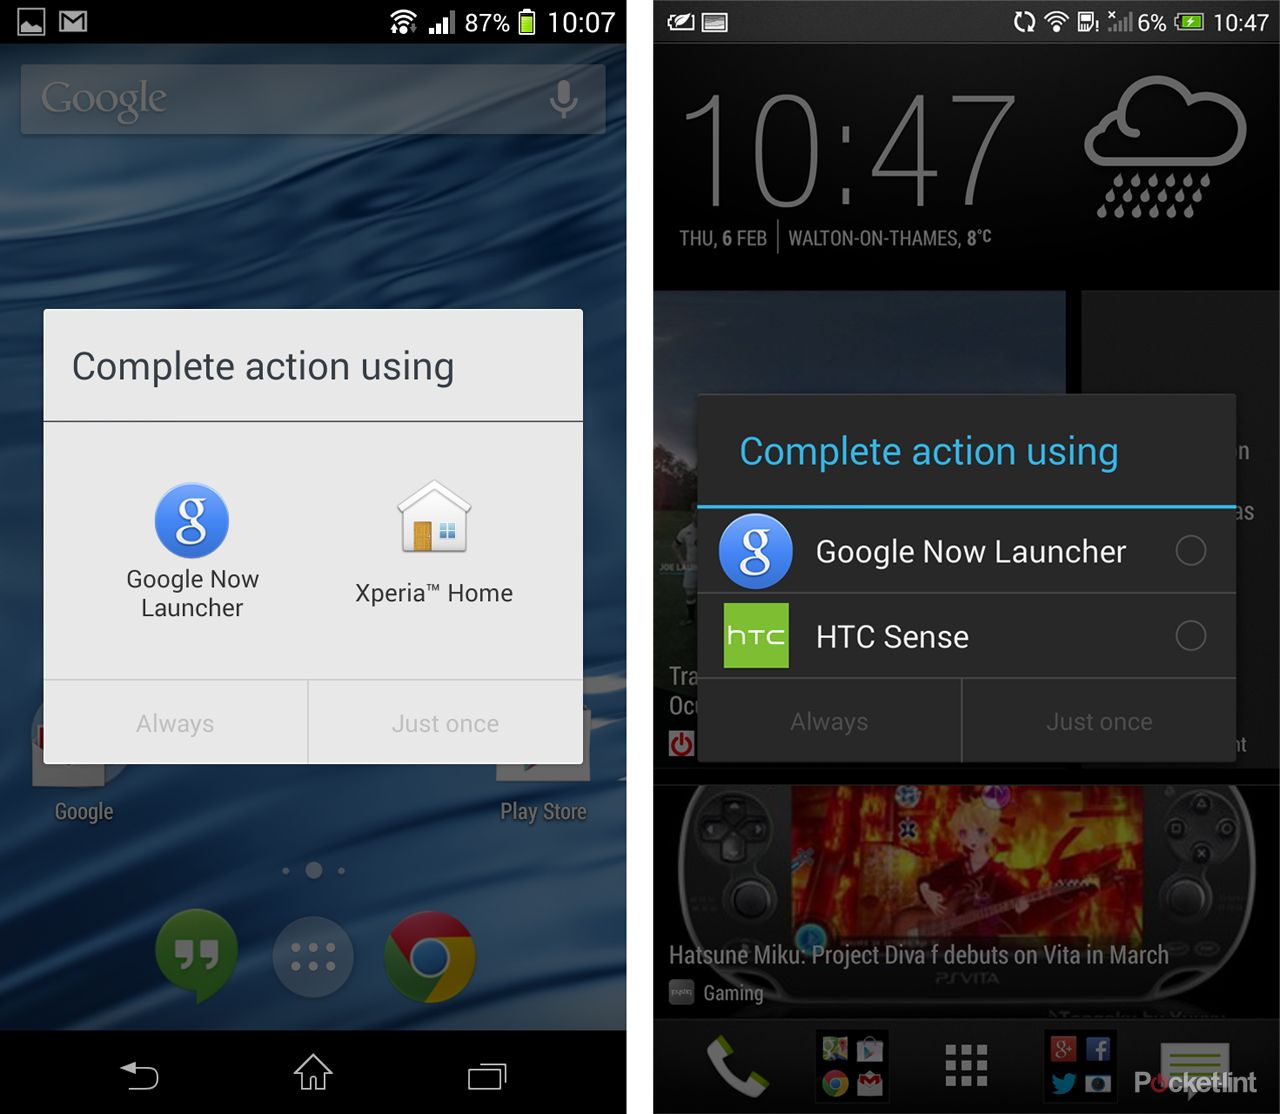 what is the google experience launcher and why has its name changed to google now launcher image 3